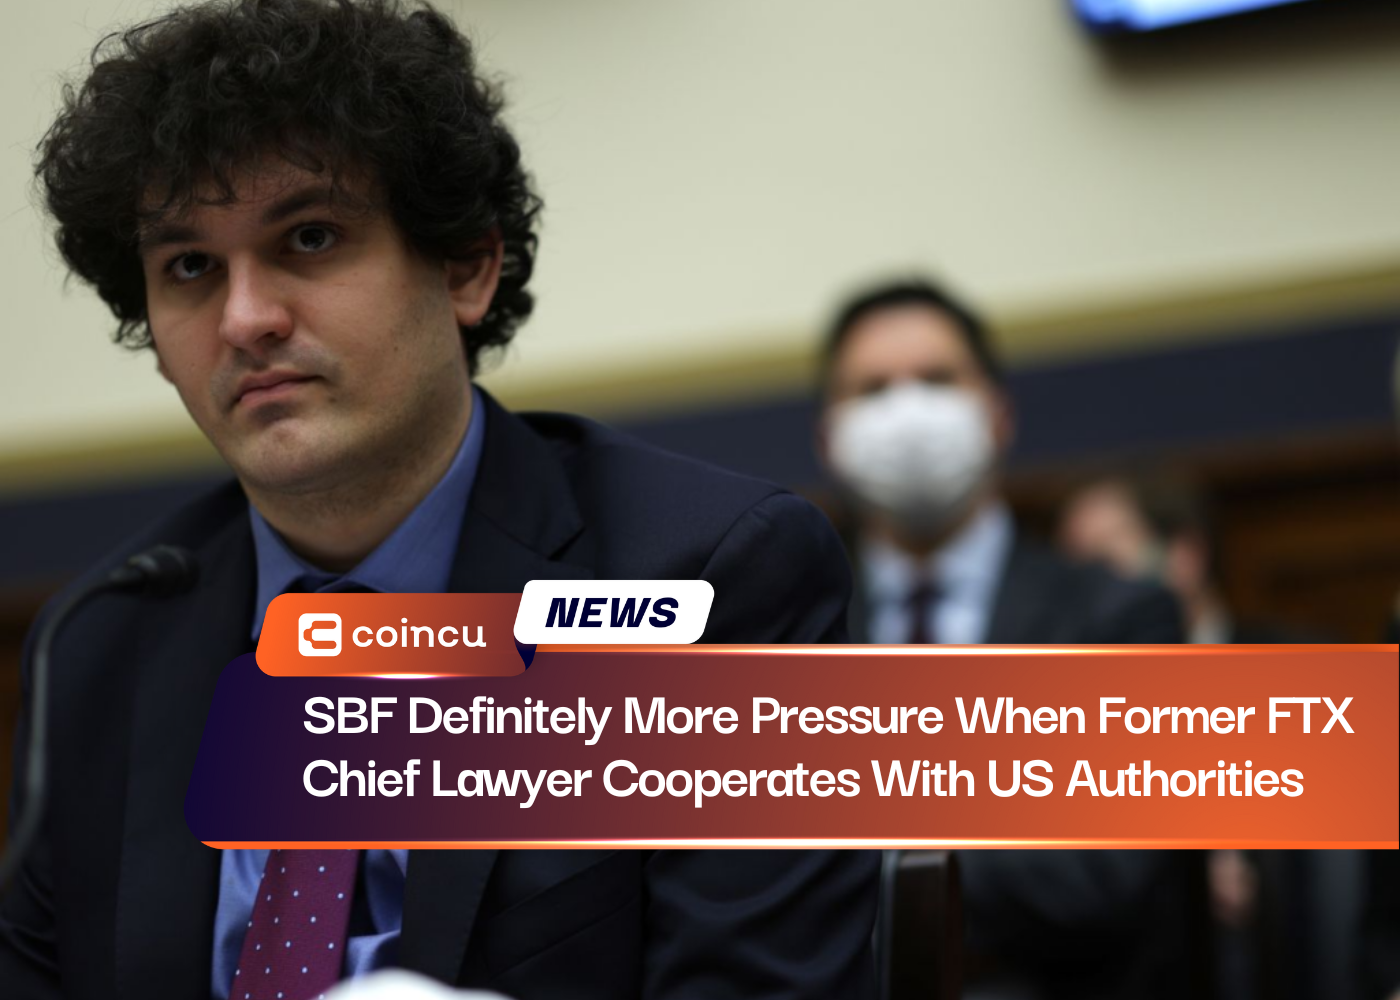 SBF Definitely More Pressure When Former FTX Chief Lawyer Cooperates With US Authorities